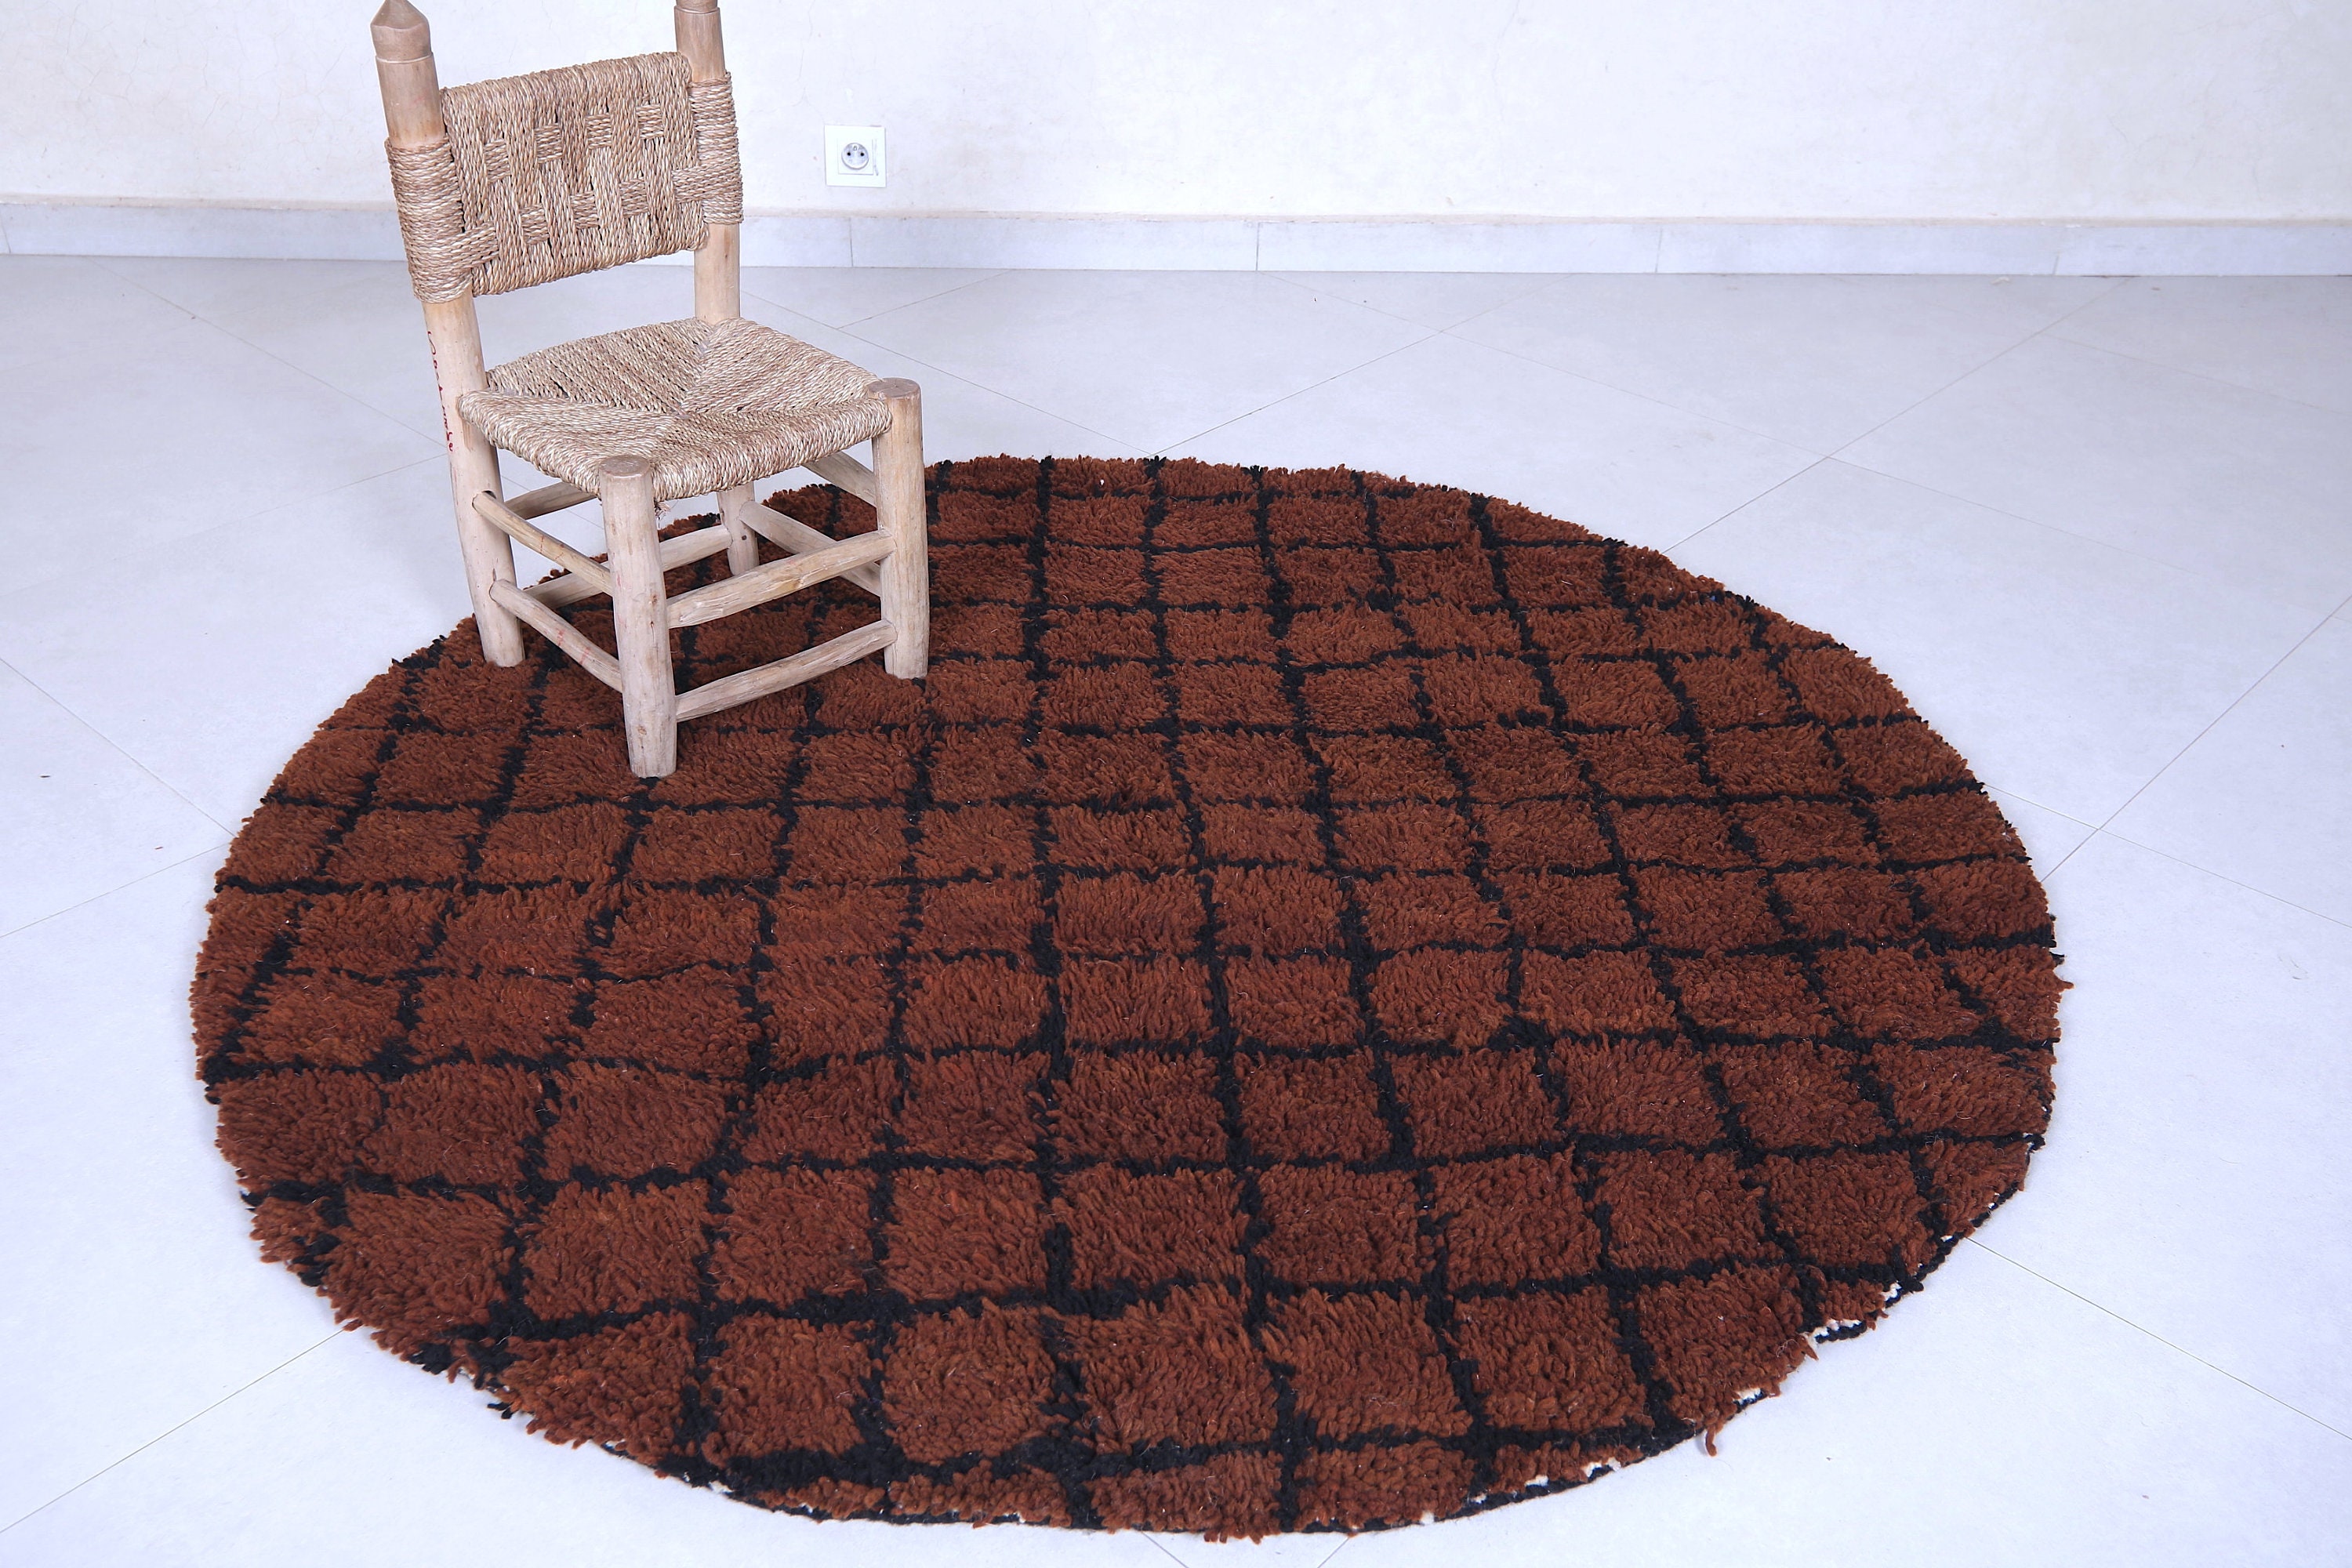 Modern Rug 4Ft Round Contemporary Abstract Rug Geometric Area Rug Carpet  for Bedroom Nonslip Circle Rugs Artistic Faux Wool Rug 4'x4' Shaggy  Farmhouse